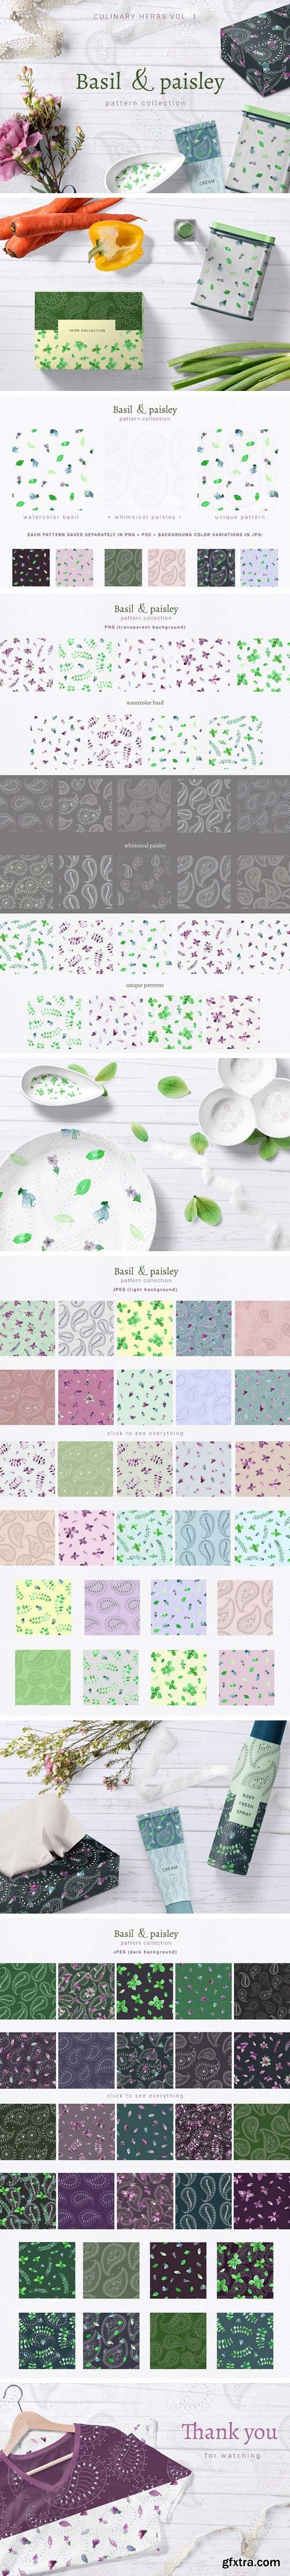 CM - Basil & paisley - pattern collection 2257418